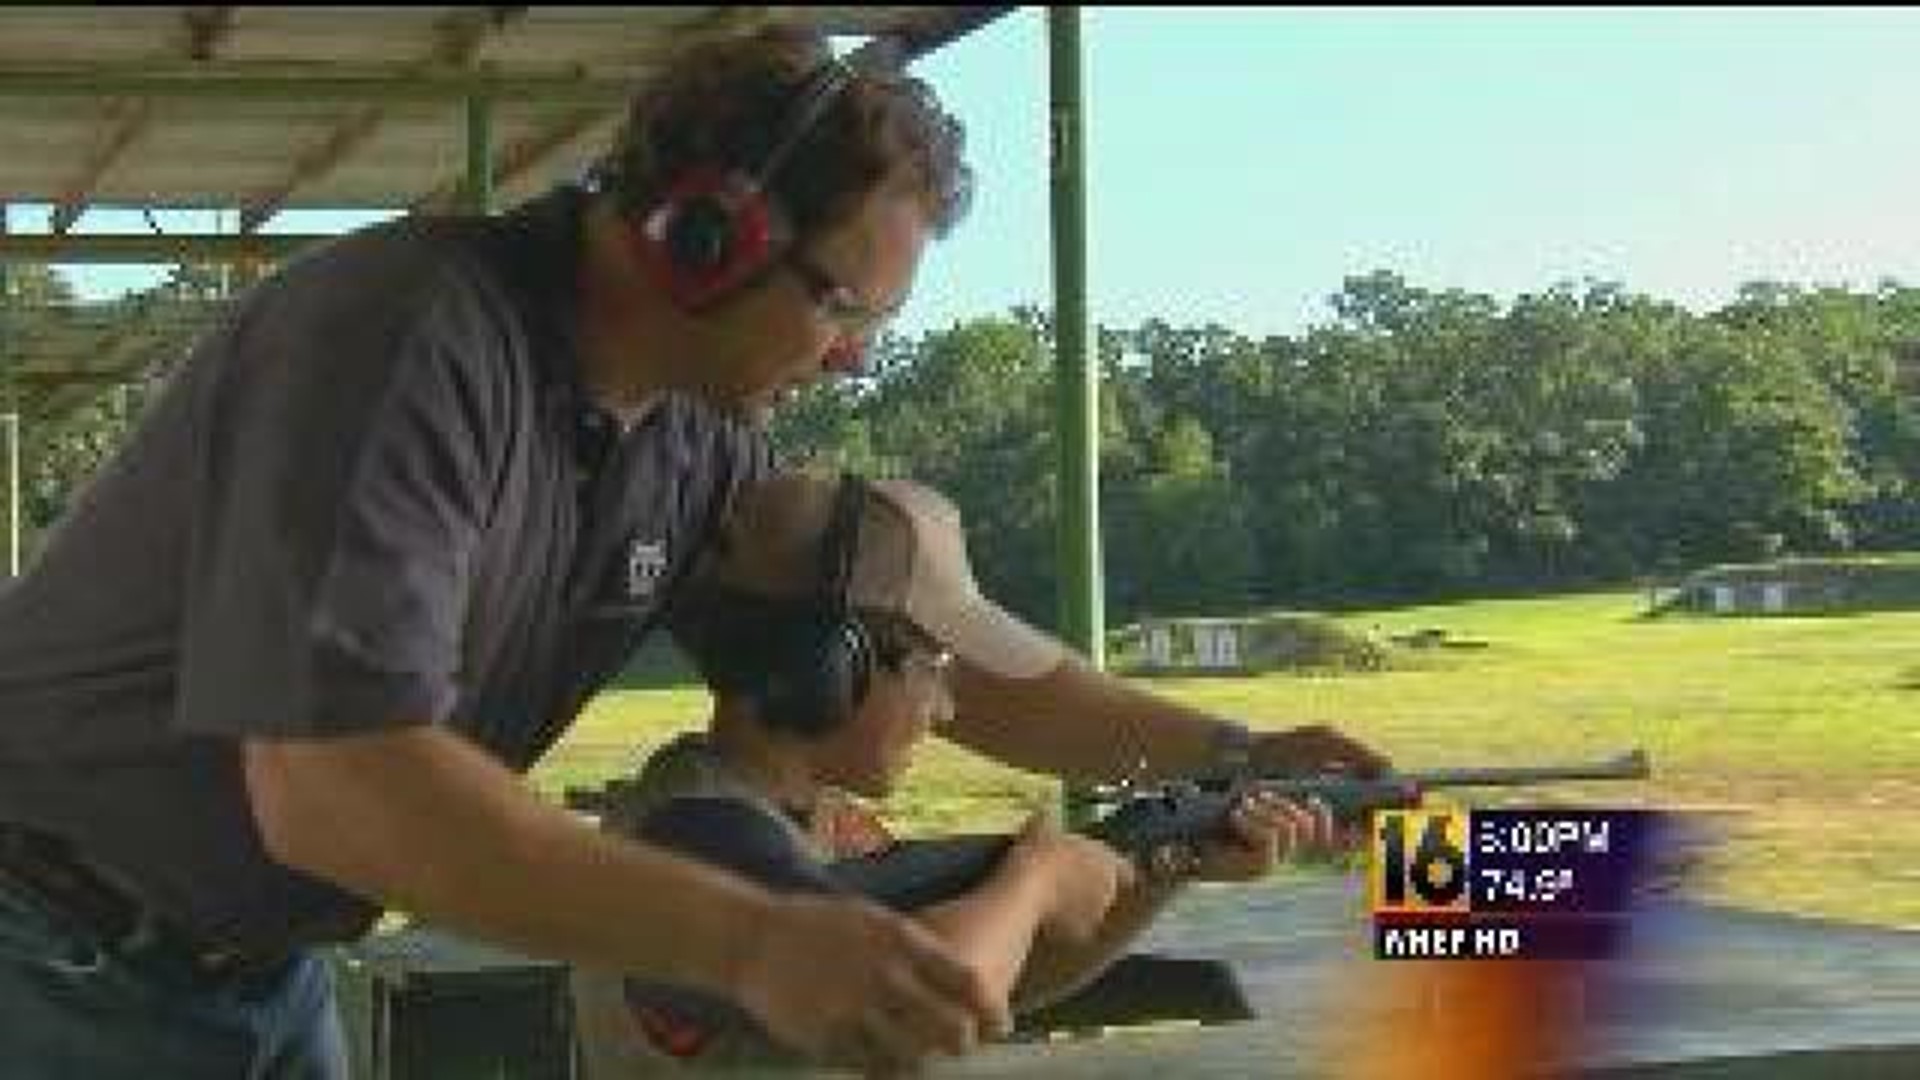 Maker Of Youth Rifle Gains Notoriety After Death